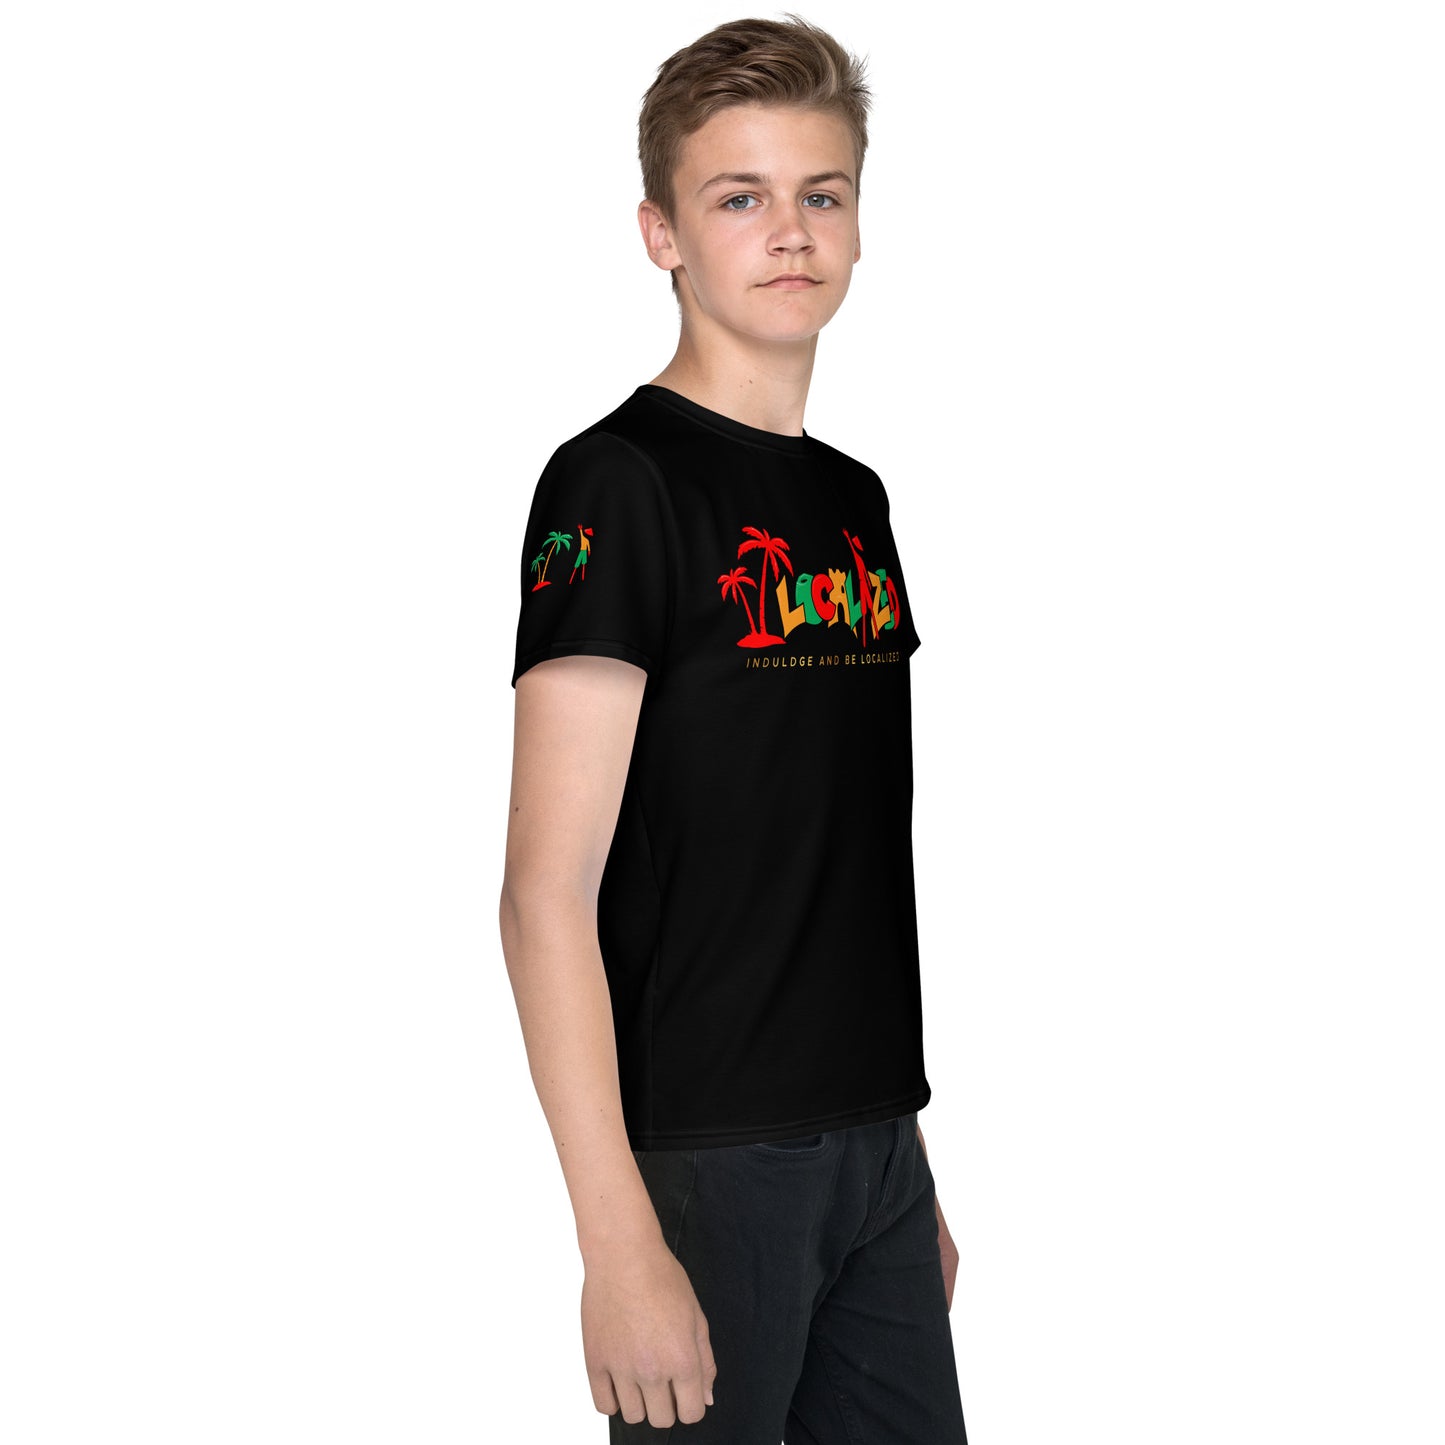 Black V.Localized (Ice/Gold/Green) Youth Dry-Fit T-Shirt